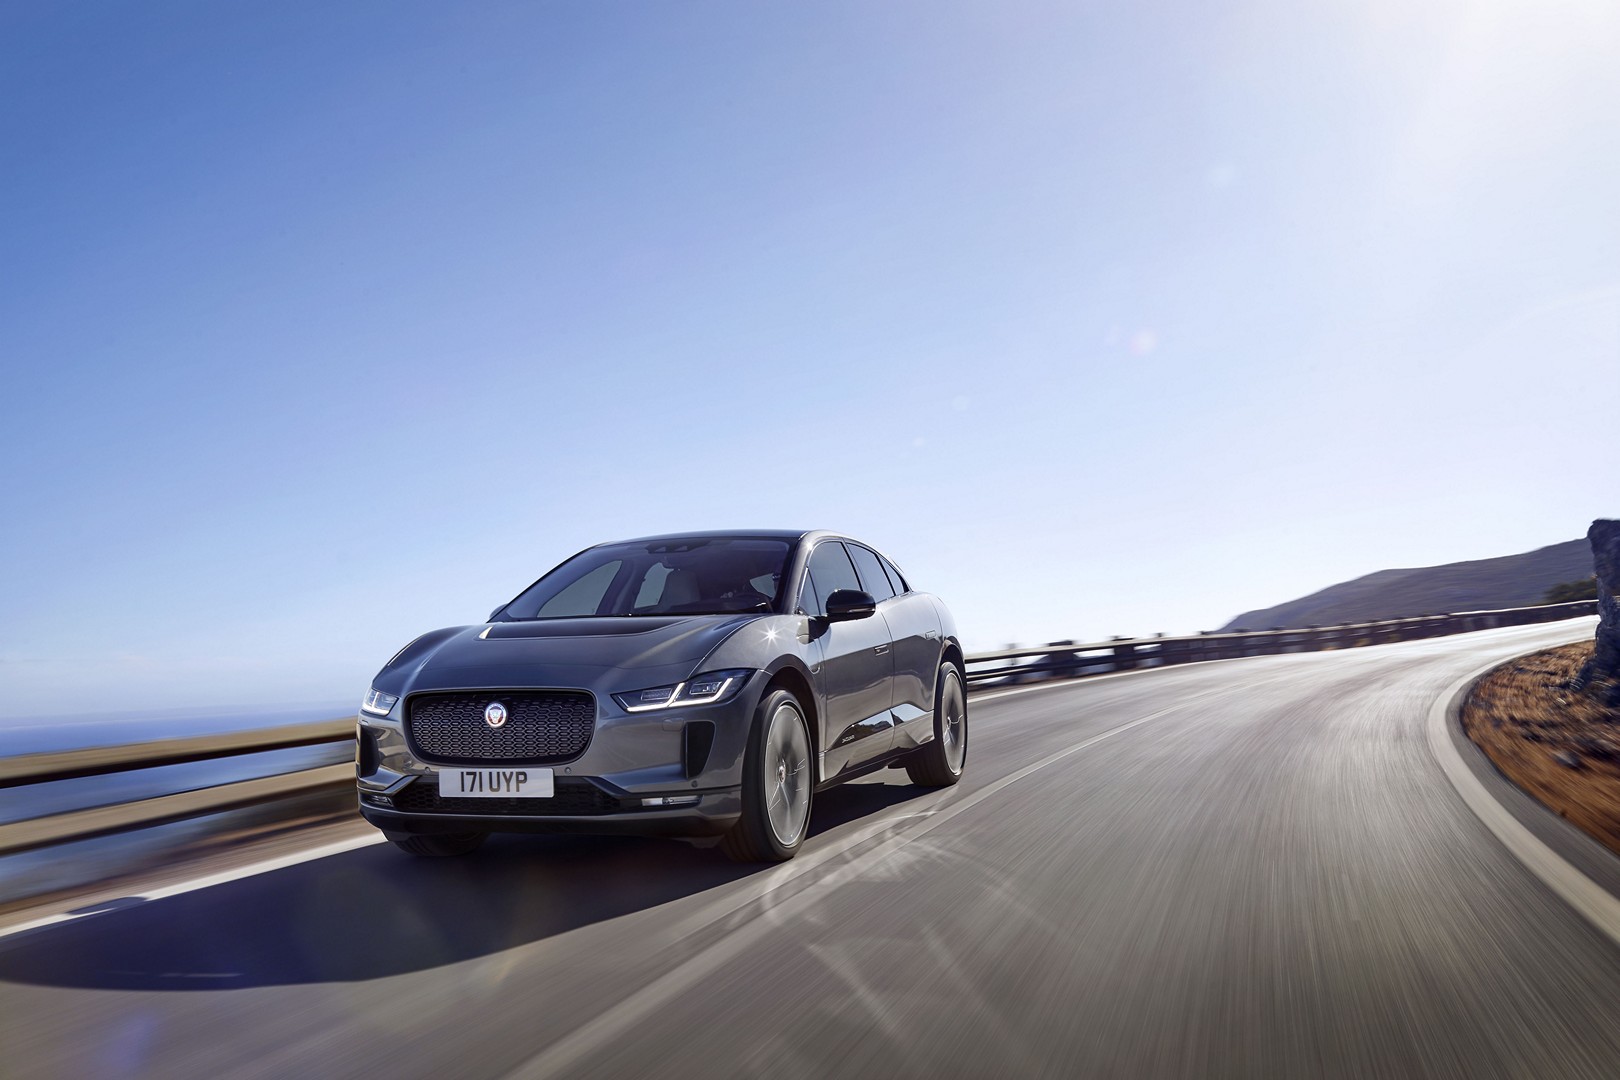 https://s1.cdn.autoevolution.com/images/news/gallery/2020-jaguar-i-pace-update-offers-234-miles-of-range-thanks-to-etrophy-know-how_55.jpg